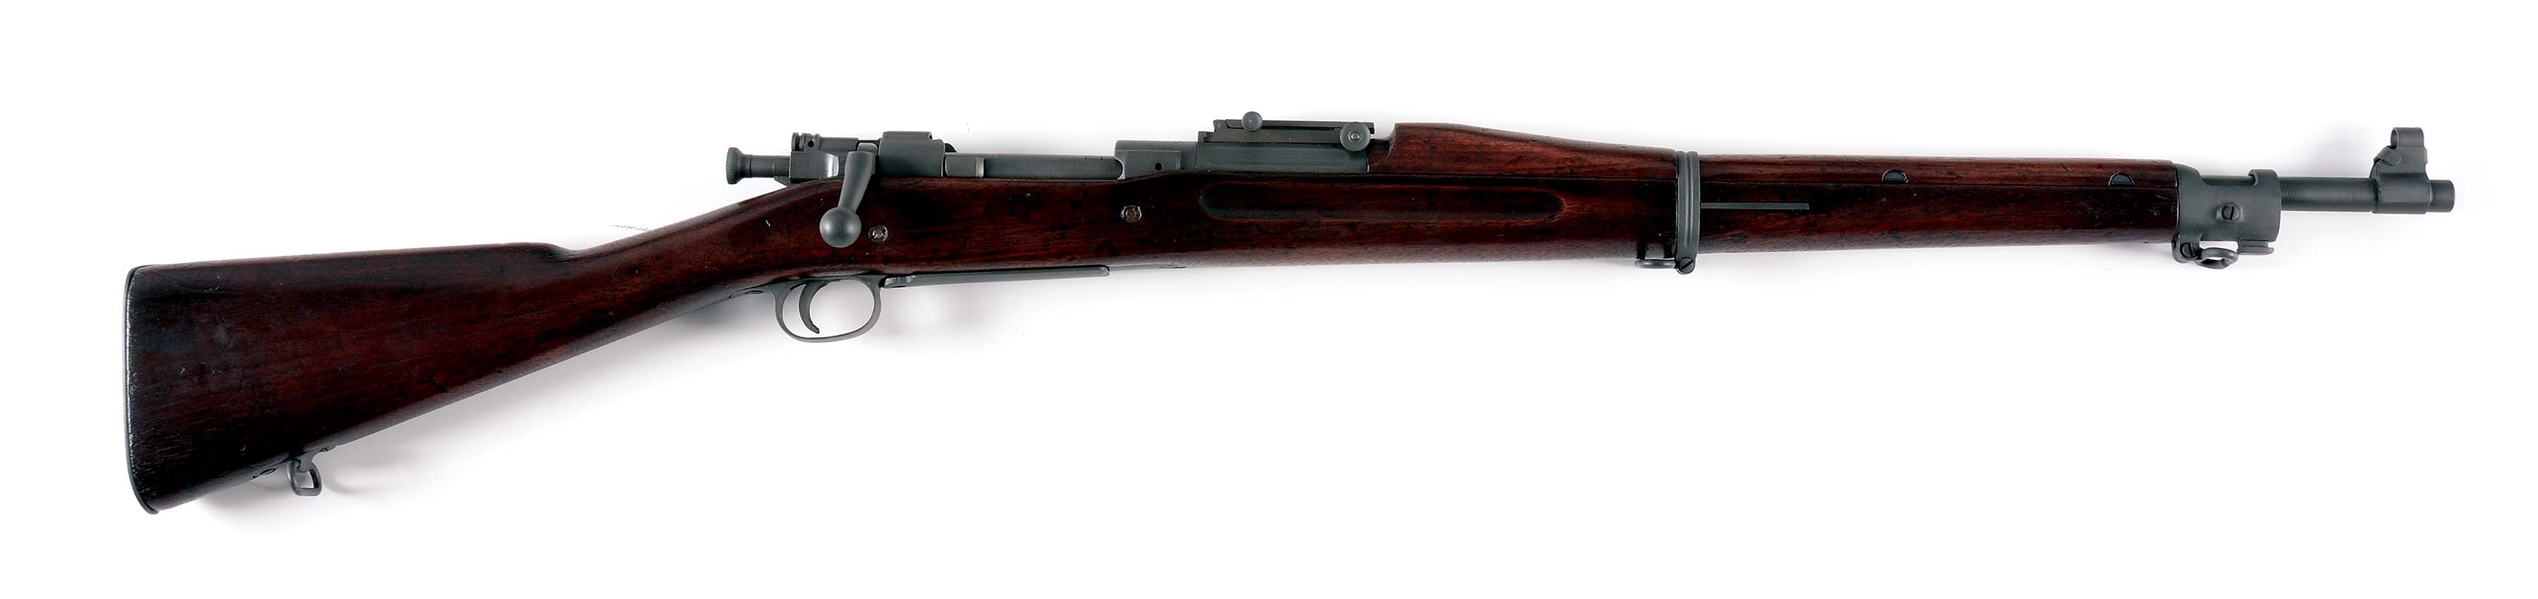 (C) ROCK ISLAND ARSENAL MODEL 1903 BOLT ACTION RIFLE WITH MARINE CORPS MODIFICATIONS.